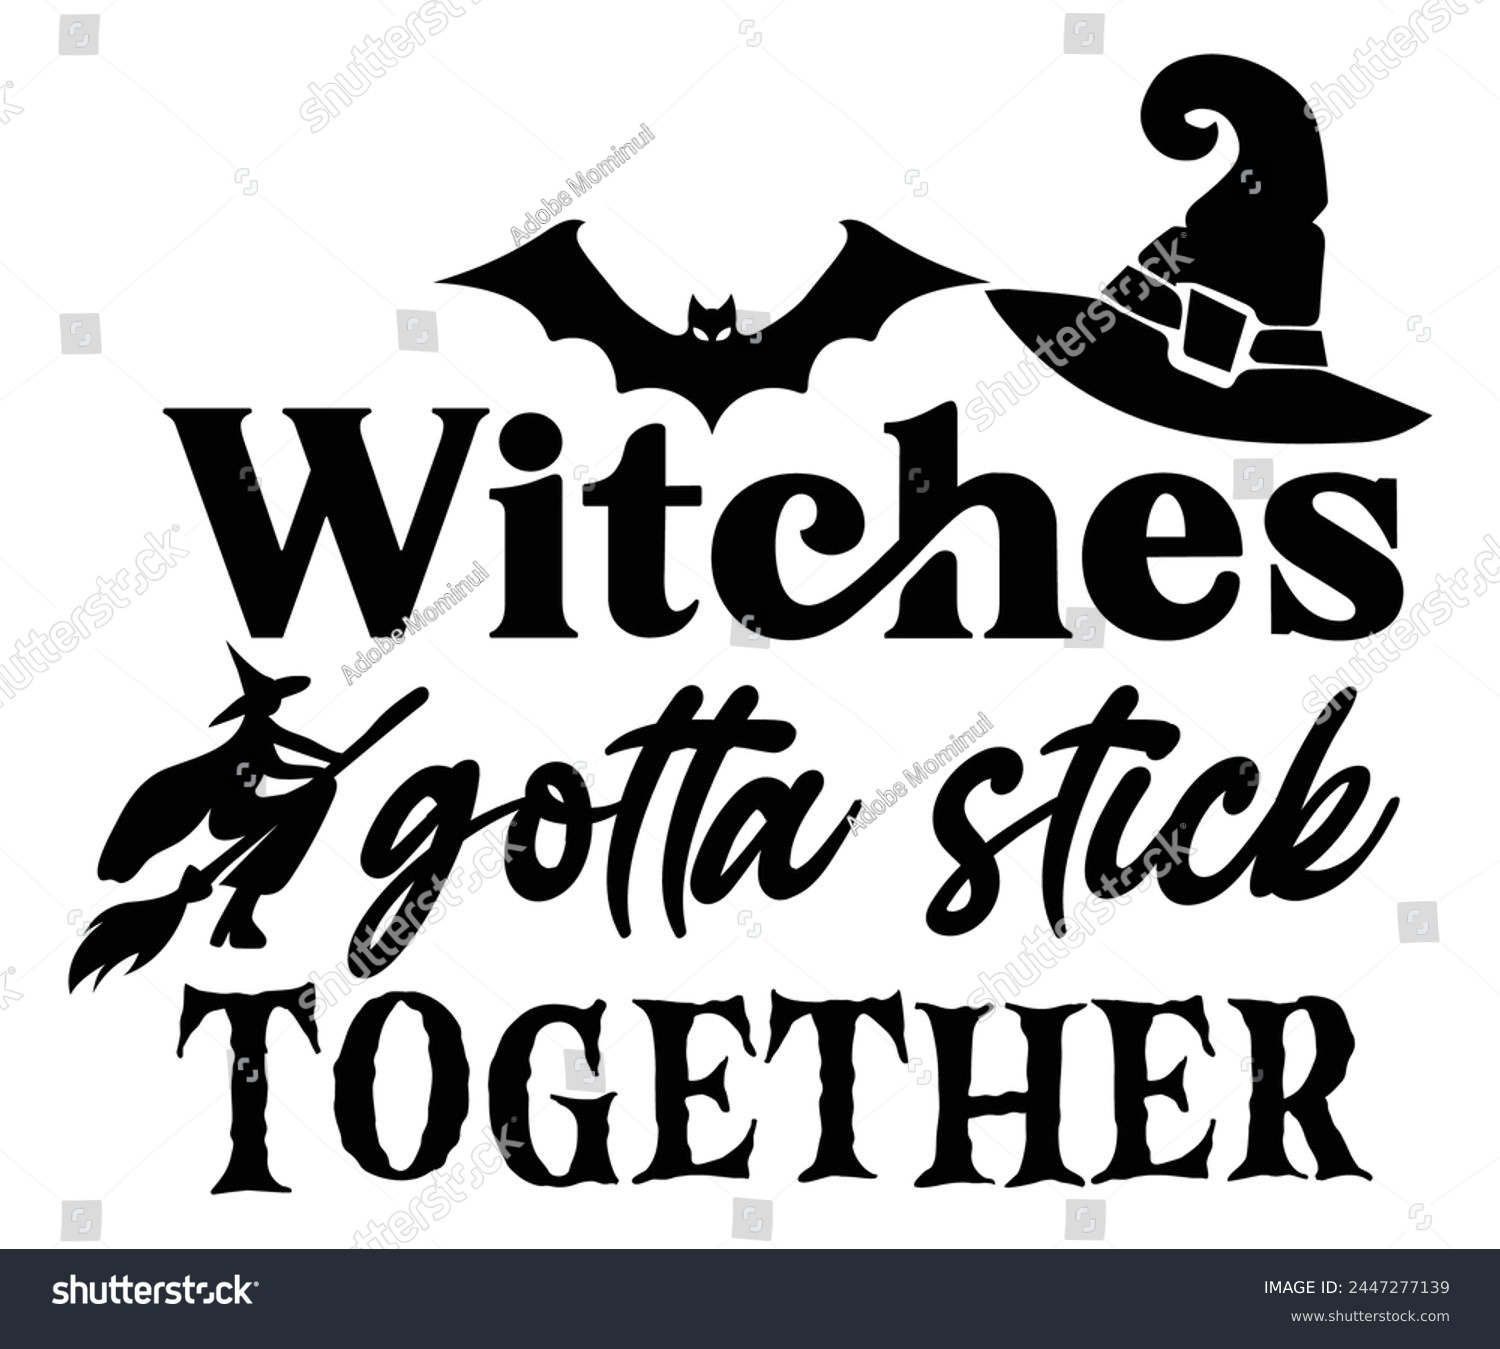 SVG of Witches Gotta Stick Together Svg,Halloween Svg,Typography,Halloween Quotes,Witches Svg,Halloween Party,Halloween Costume,Halloween Gift,Funny Halloween,Spooky Svg,Funny T shirt,Ghost Svg,Cut file svg